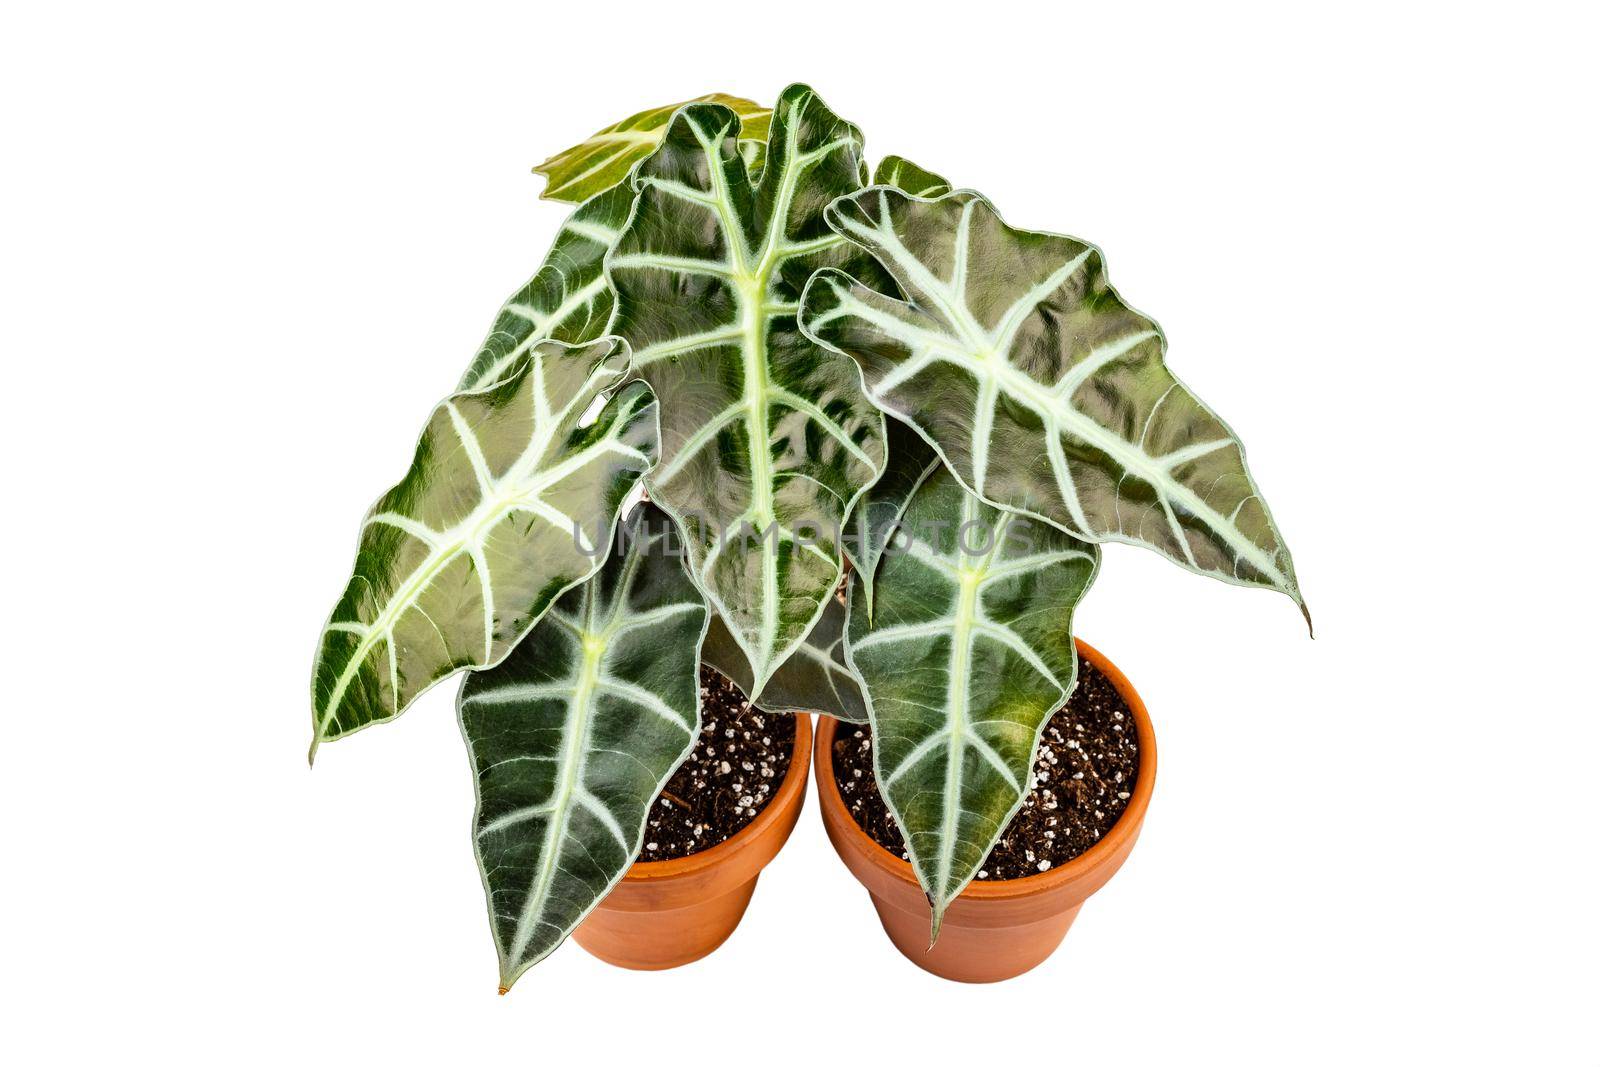 Alocasia Polly plant isolated isolated on white by Syvanych